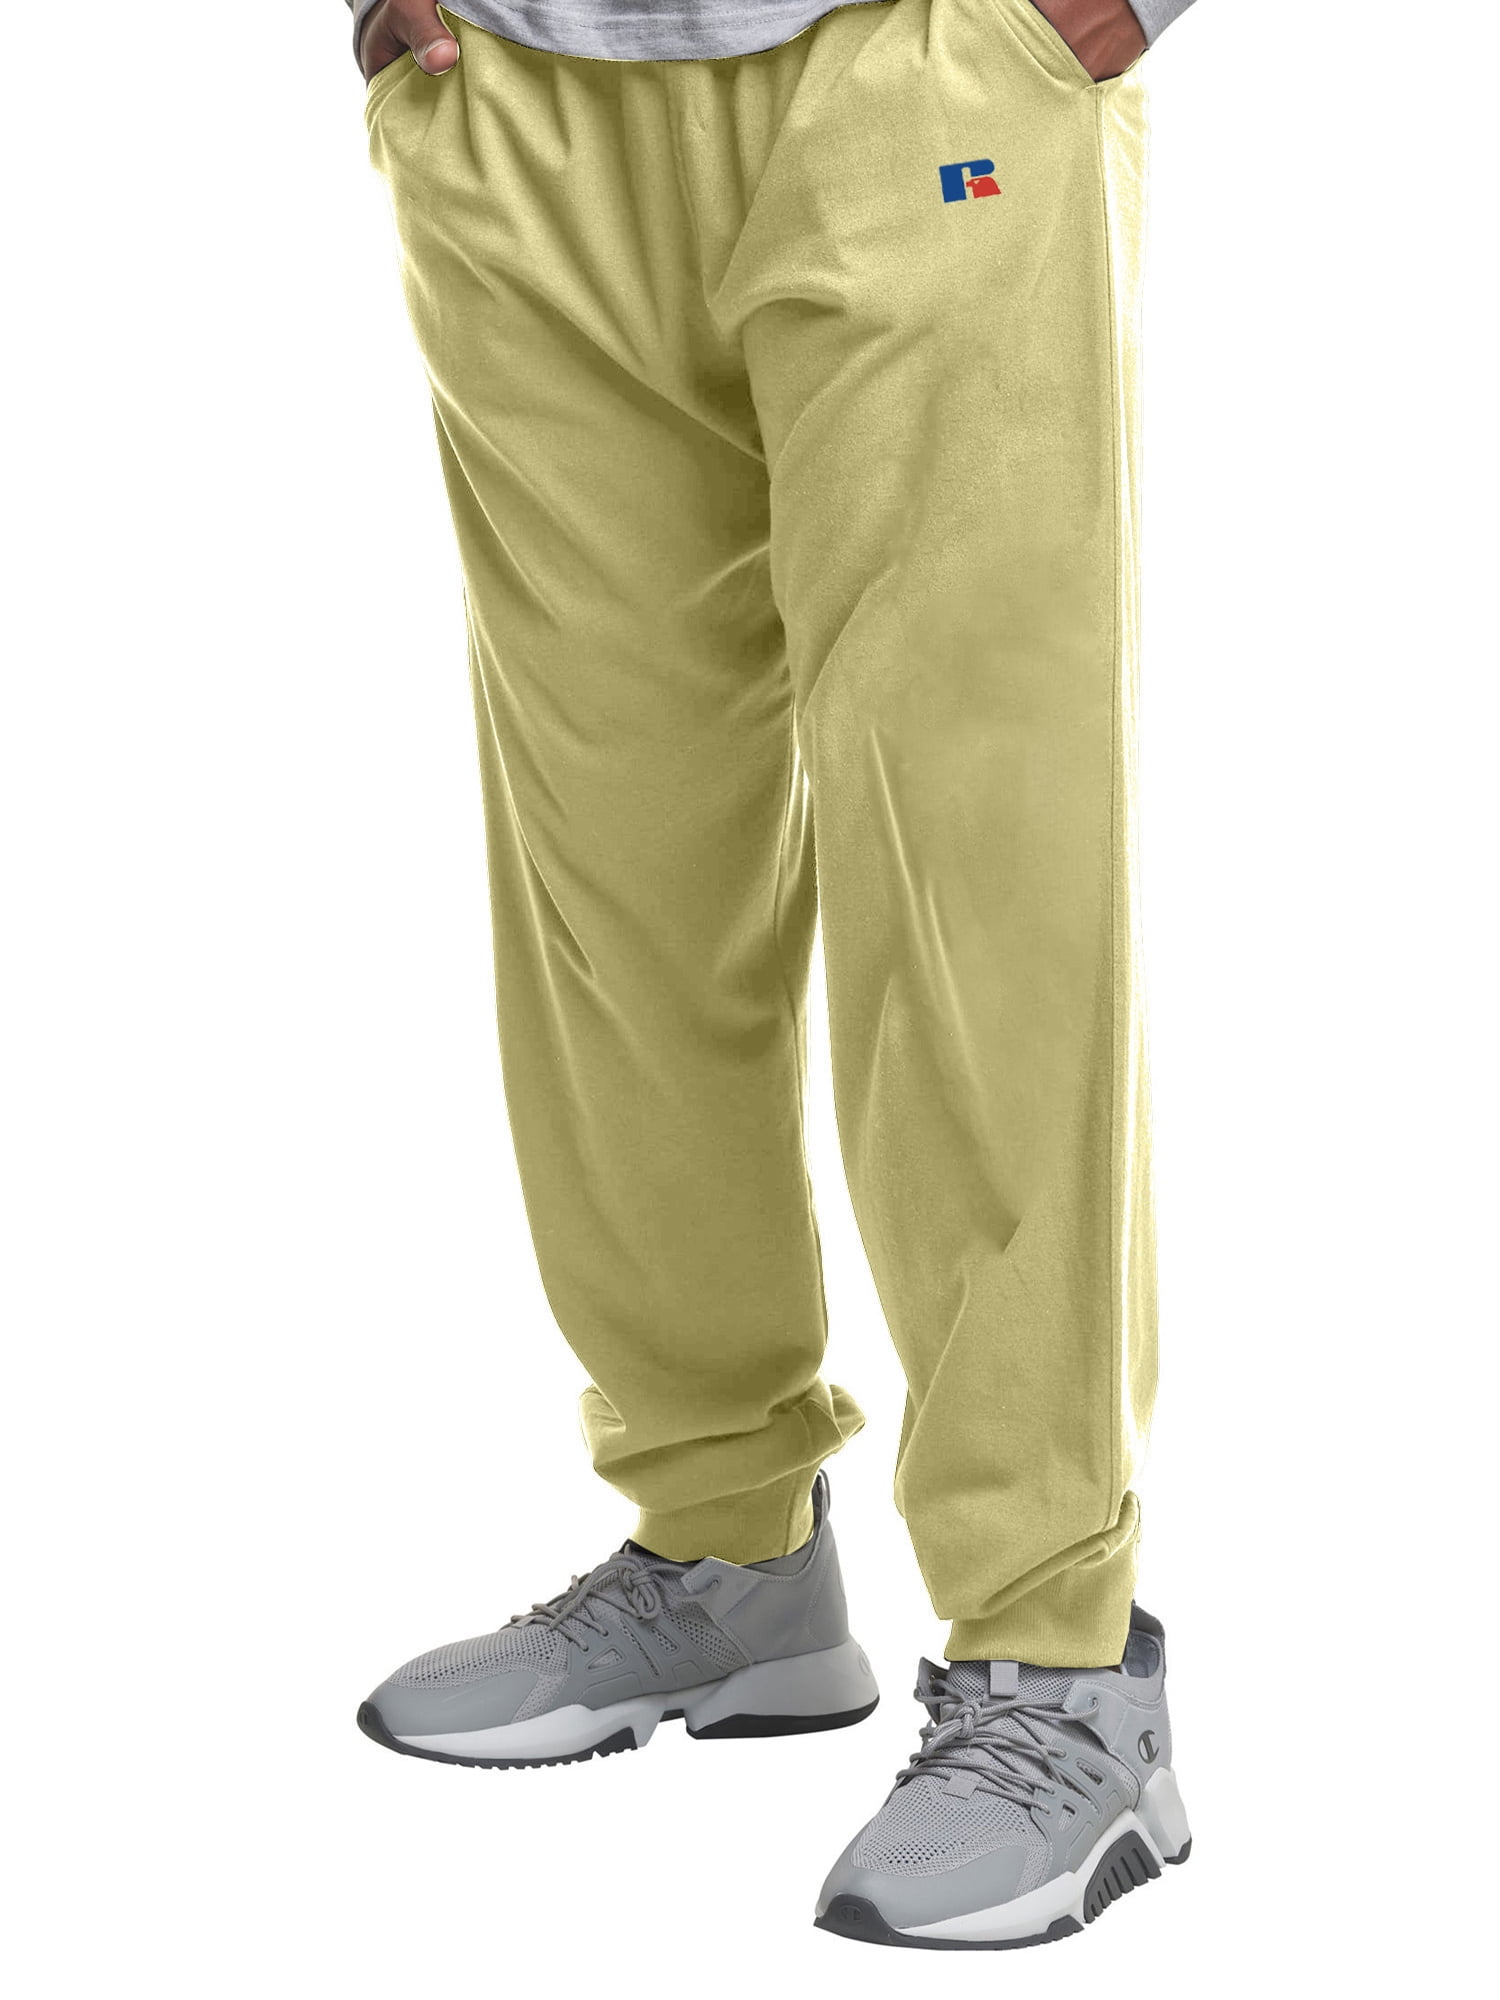 Russell Athletic Big & Tall Men's Cotton French Terry Sweatpants